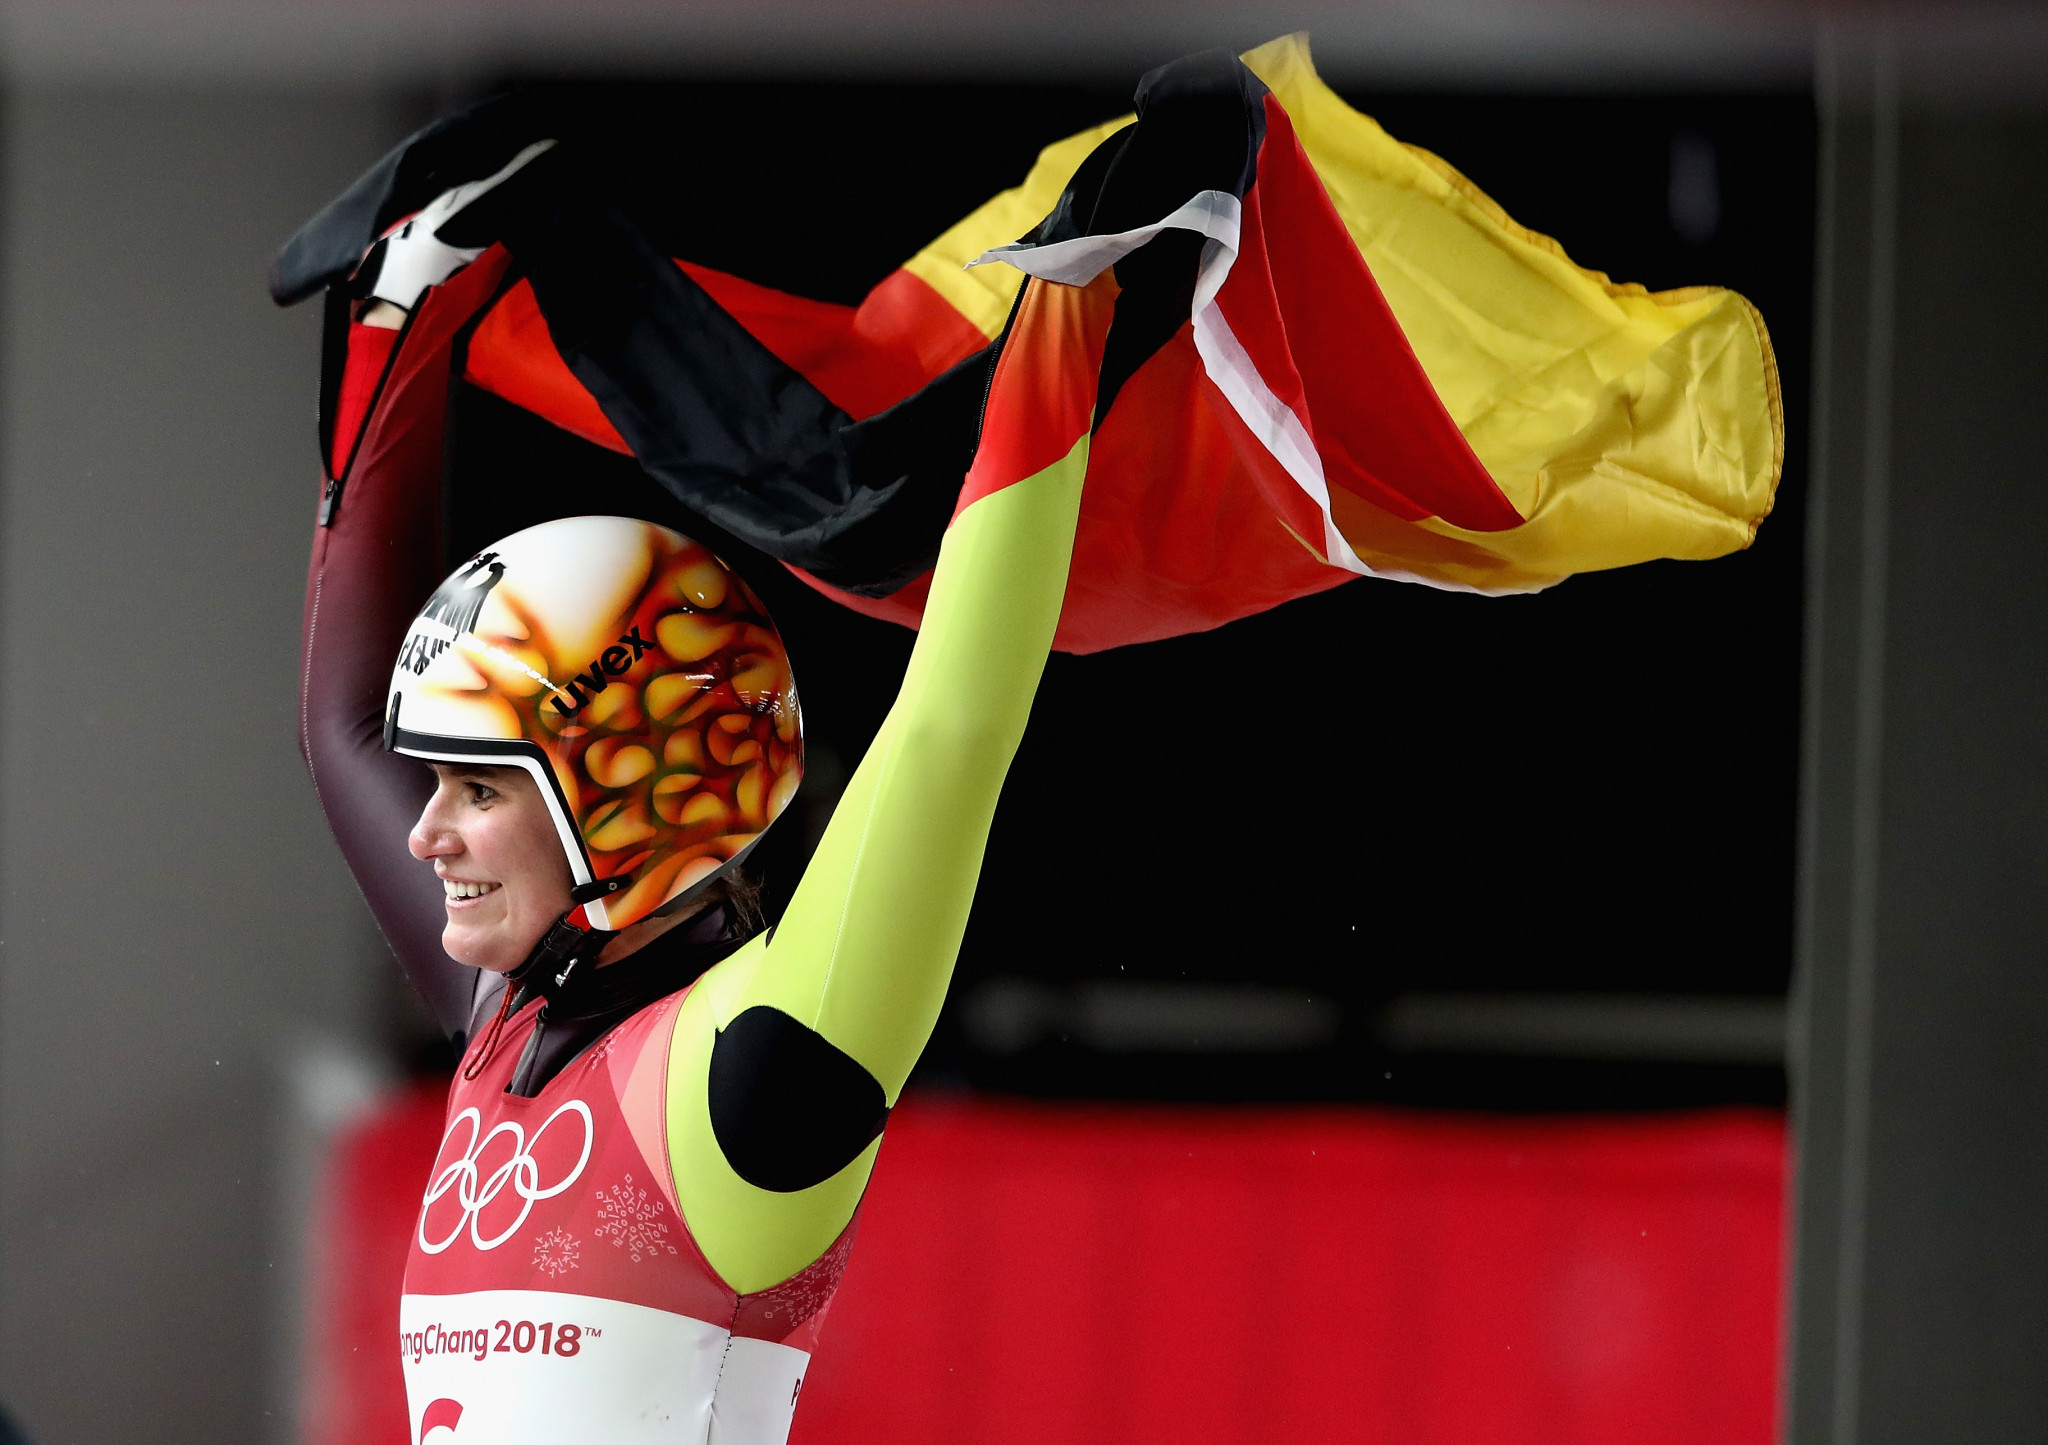 Reigning Olympic champion Natalie Geisenberger of Germany maintained her form to take gold in the first Luge World Cup event of the season in Innsbruck ©Getty Images